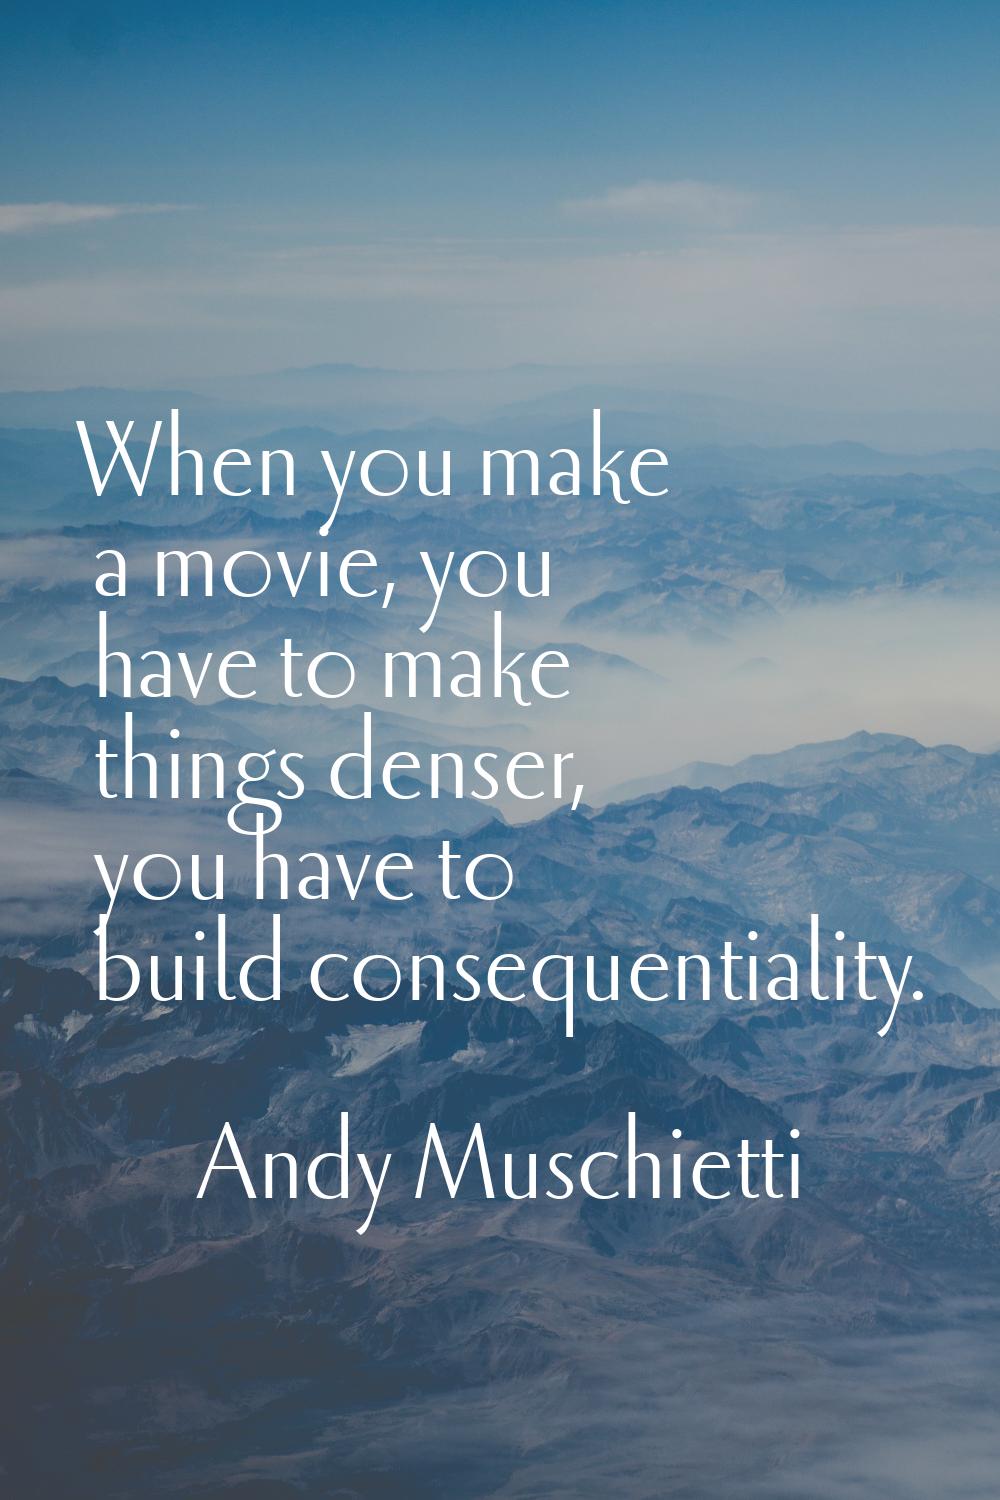 When you make a movie, you have to make things denser, you have to build consequentiality.